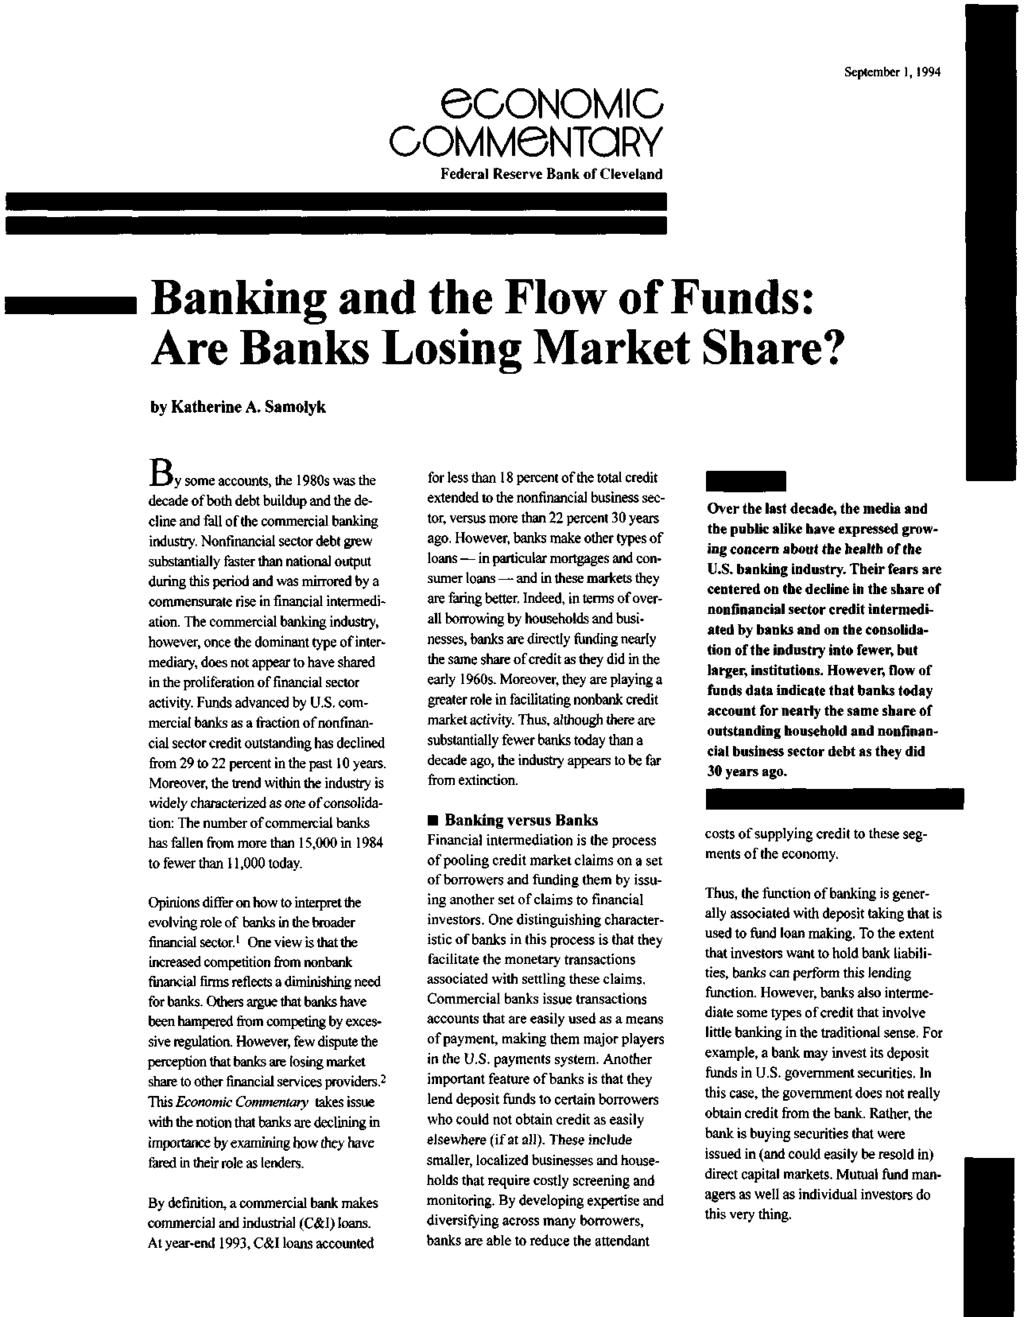 eoonomic COMMeNTORY Federal Reserve Bank of Cleveland September 1,1994 Banking and the Flow of Funds: Are Banks Losing Market Share? by Katherine A.